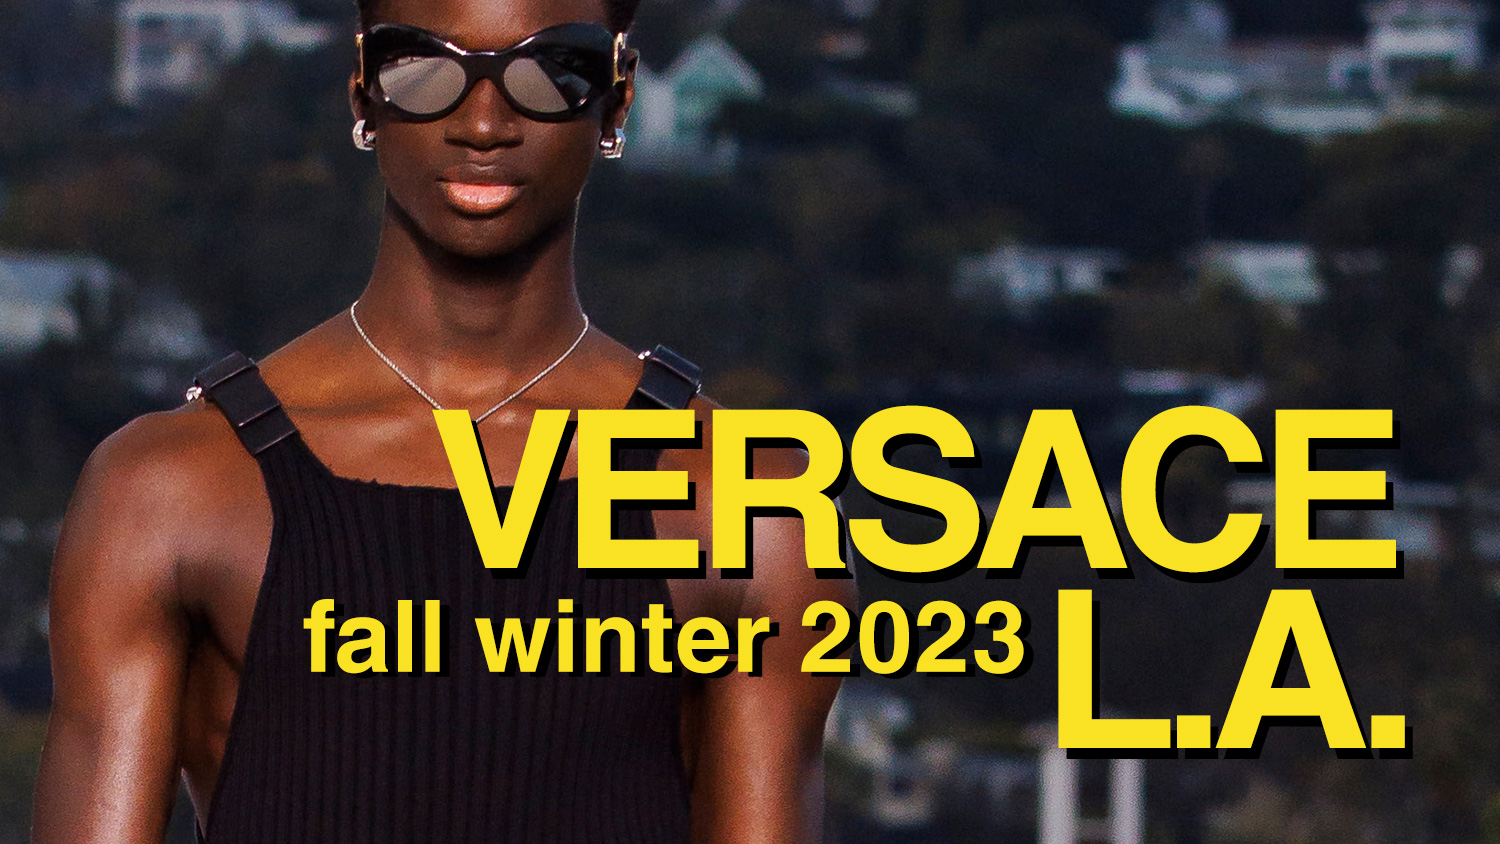 MEN'S JOURNAL ONLINE, Up-Close look at @Versace Fall Winter 2023  collection by @Donatella_Versace @versacesworld #Versace #VersaceMen  #VersaceFW23 #Donatella